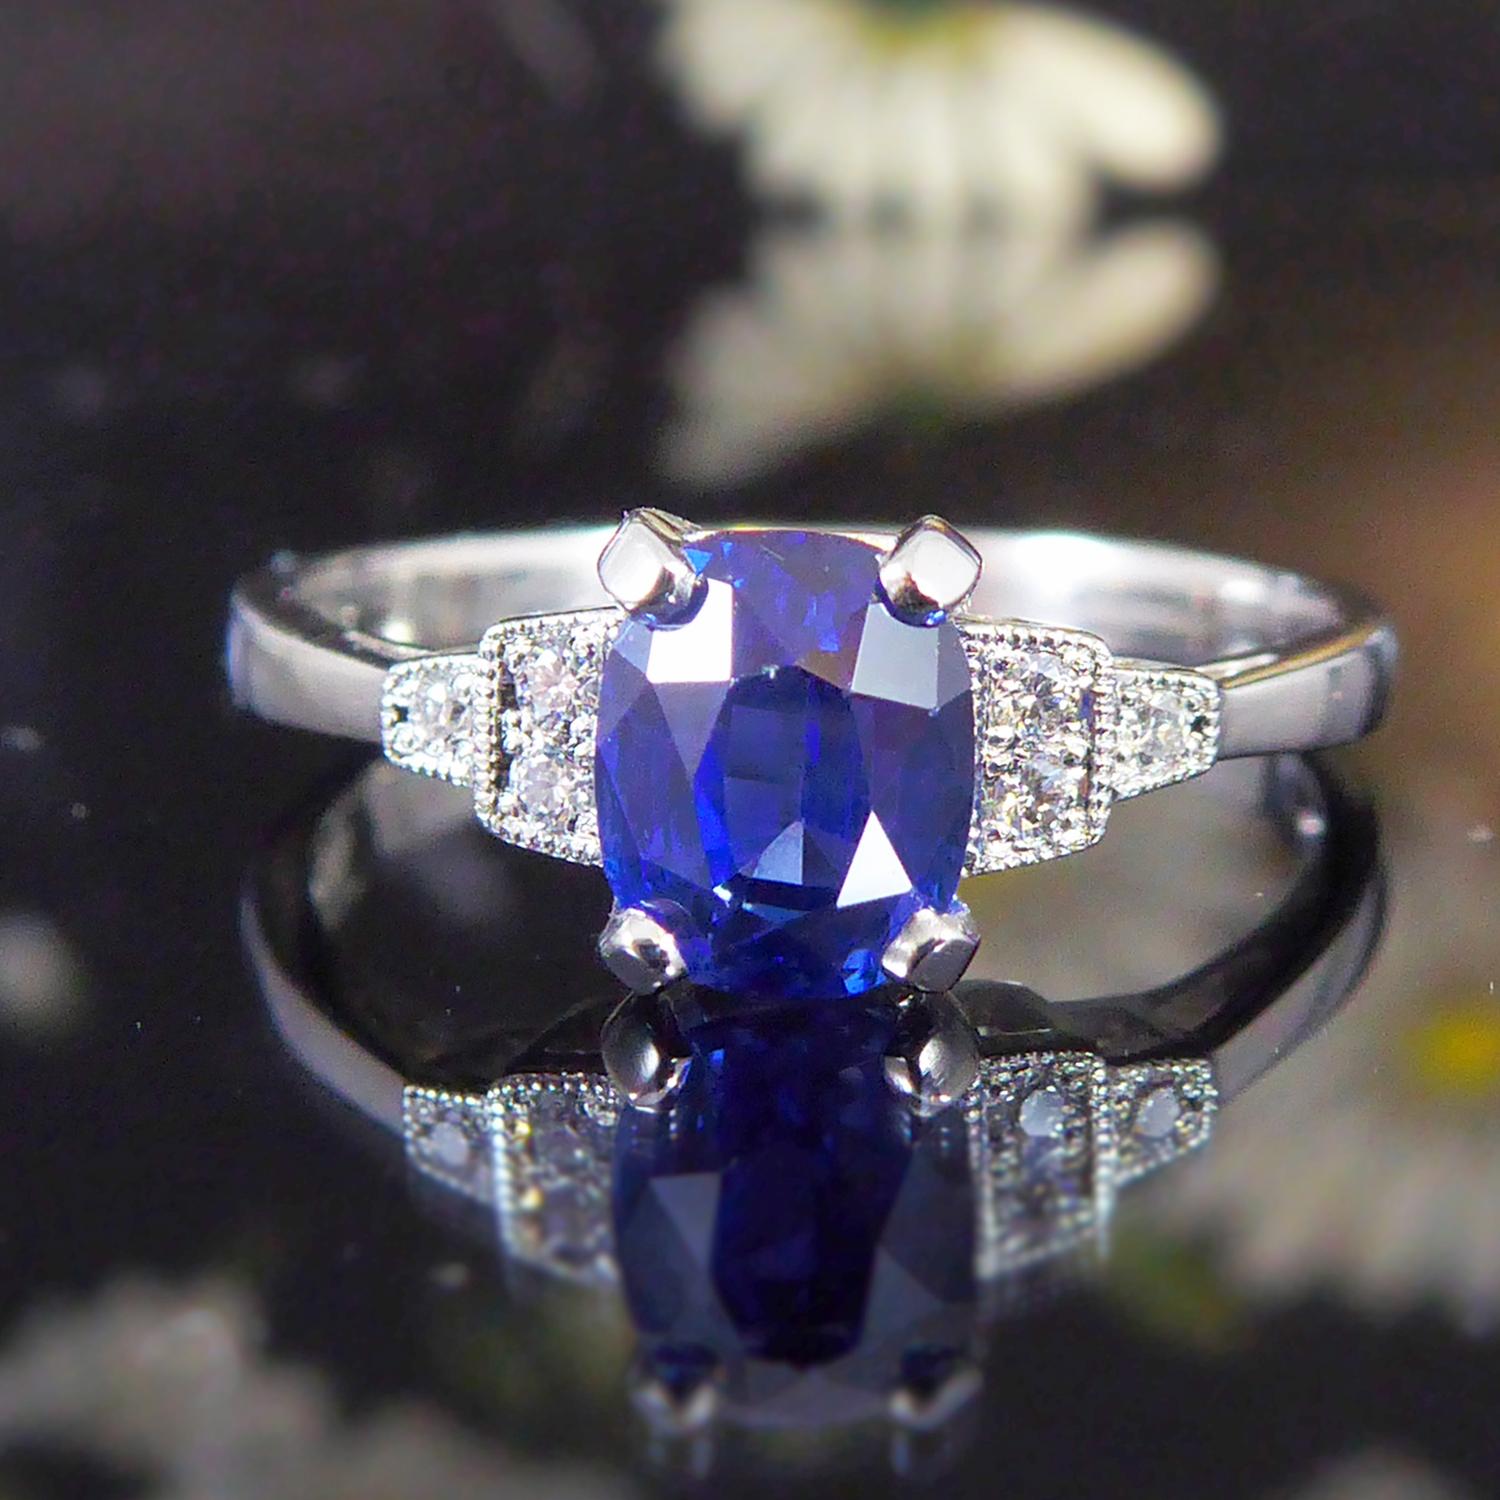 Women's Art Deco Style Oval Sapphire Solitaire Ring Diamond Shoulders and Platinum Band